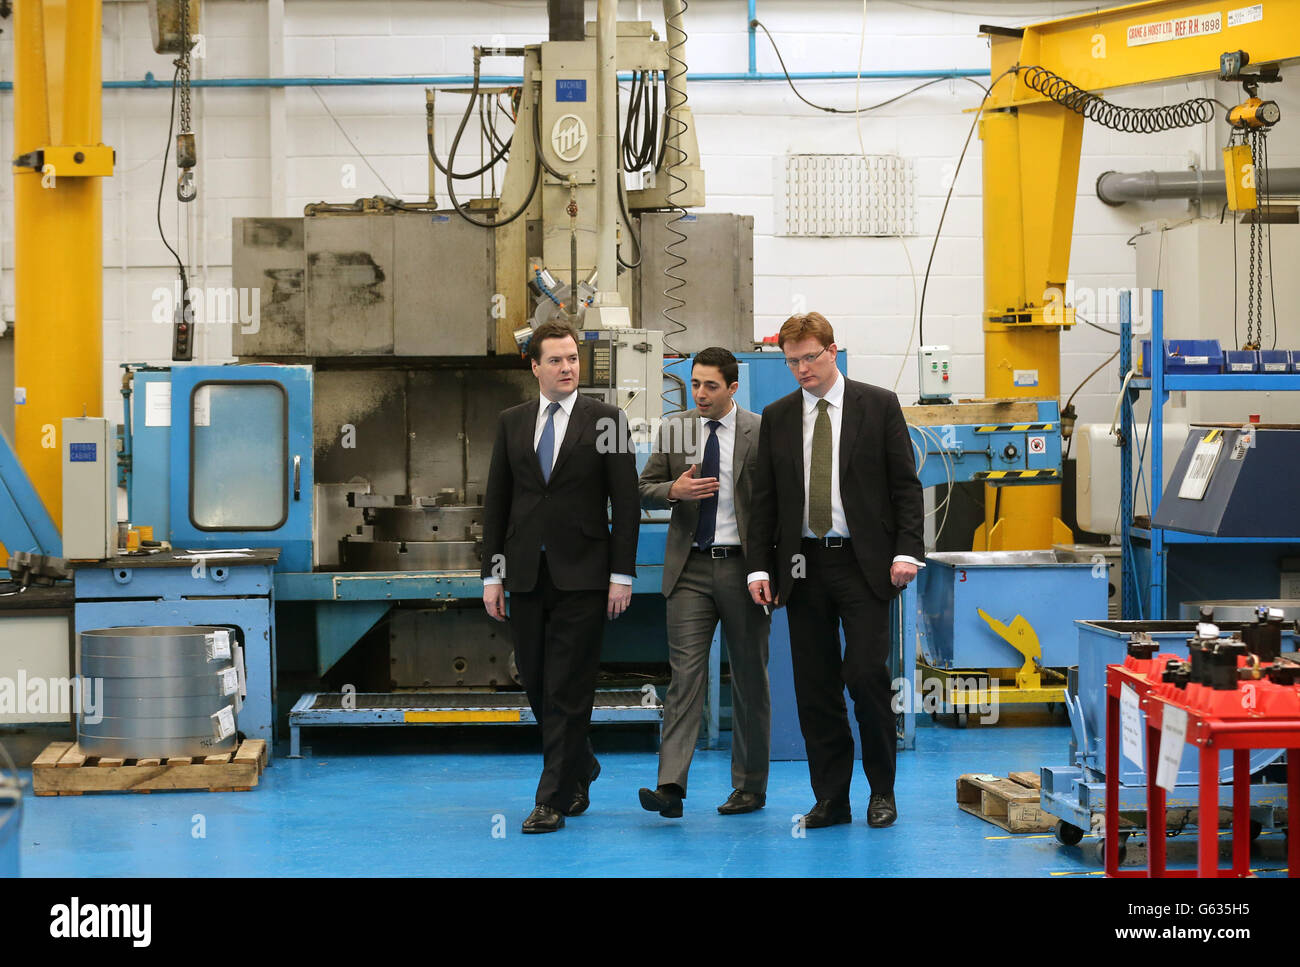 The Chancellor of the Exchequer George Osborne and Chief Secretary to the Treasury Danny Alexander with Yan Tiefenbrun Director of Operations during a visit to the CNC milling section at Castle Precision Engineering in Glasgow after the launch of the Scotland Analysis paper on Currency and Monetary Policy in Glasgowl. Stock Photo